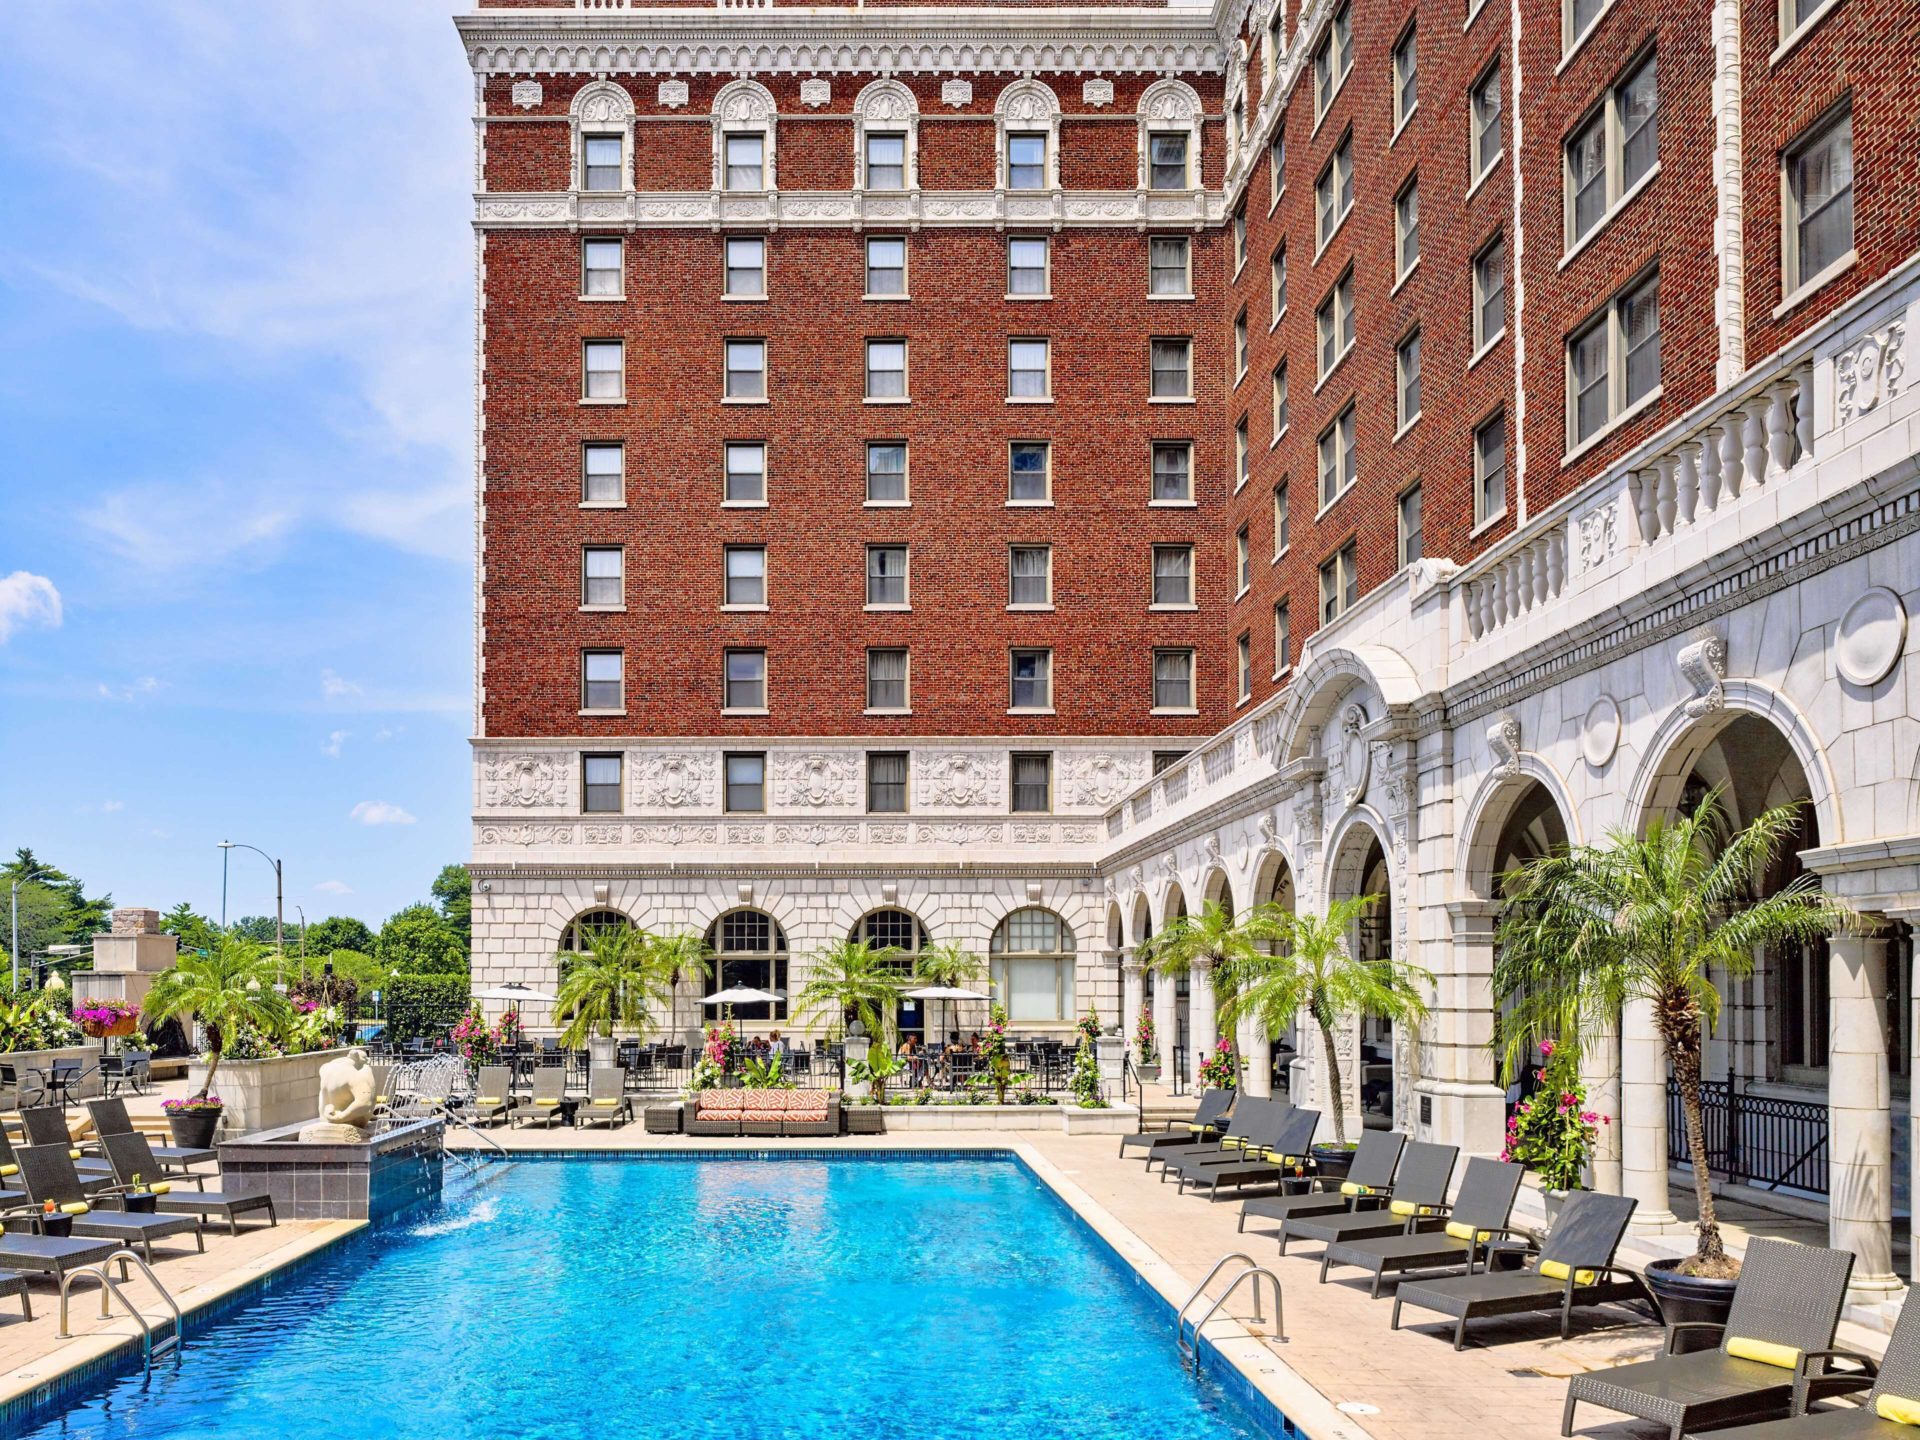 Chase Park Plaza Royal Sonesta is a lesbian and gay friendly hotel in St Louis